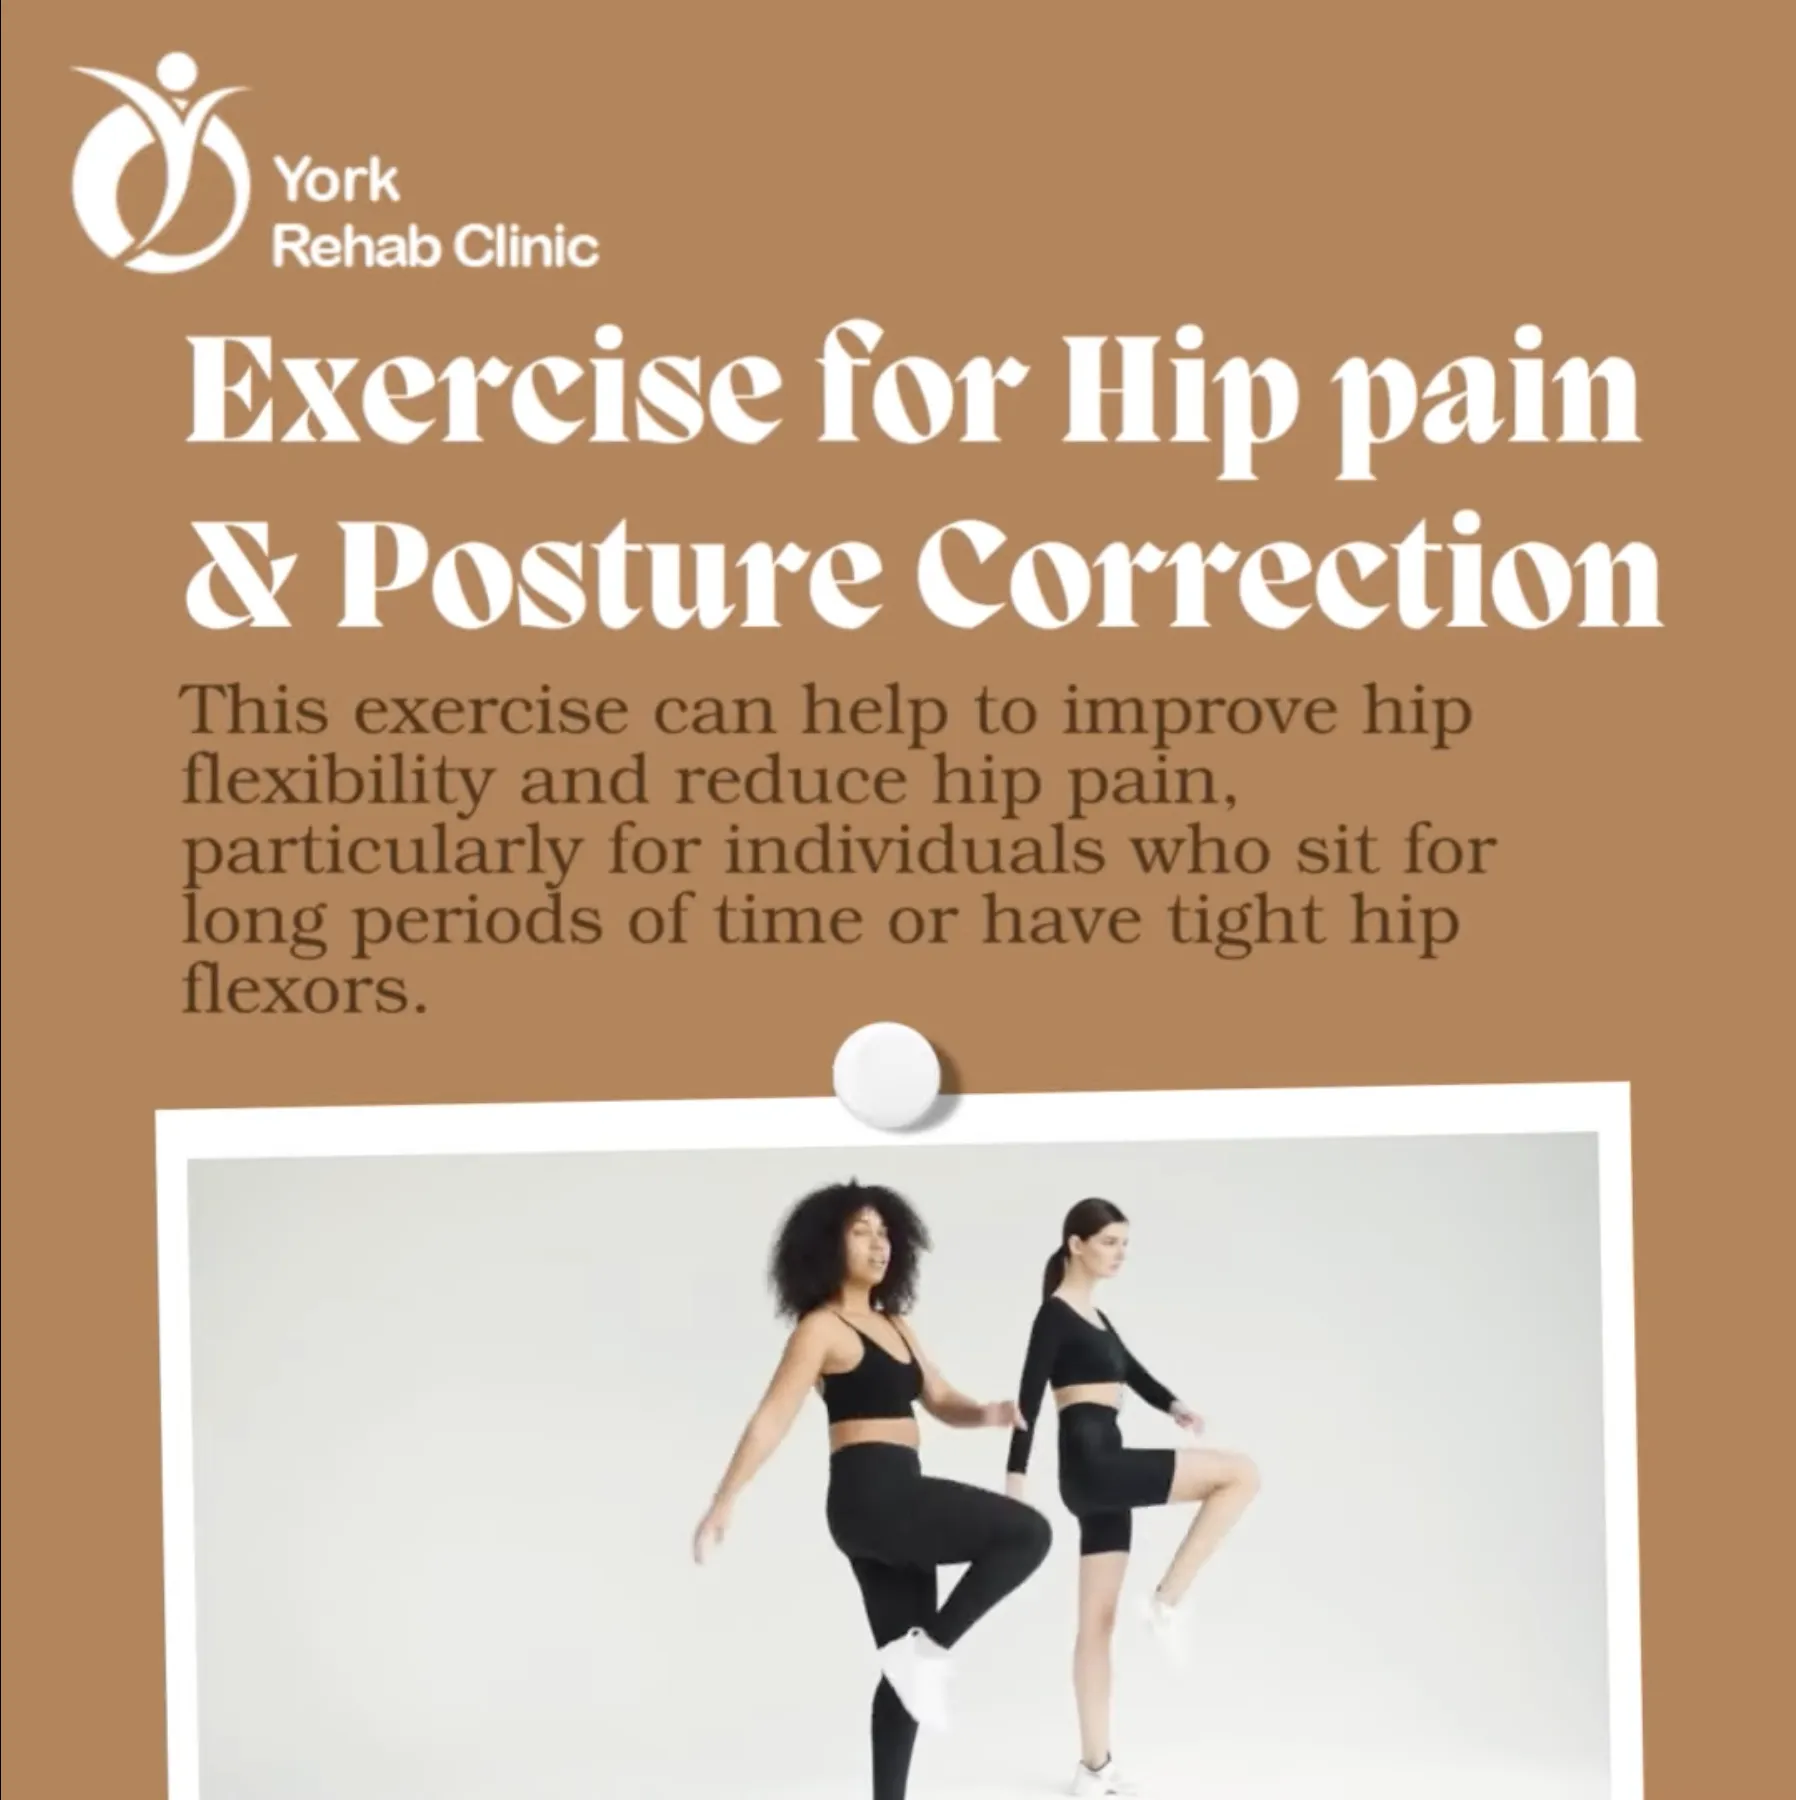 Exercise for Hip pain & Posture Correction